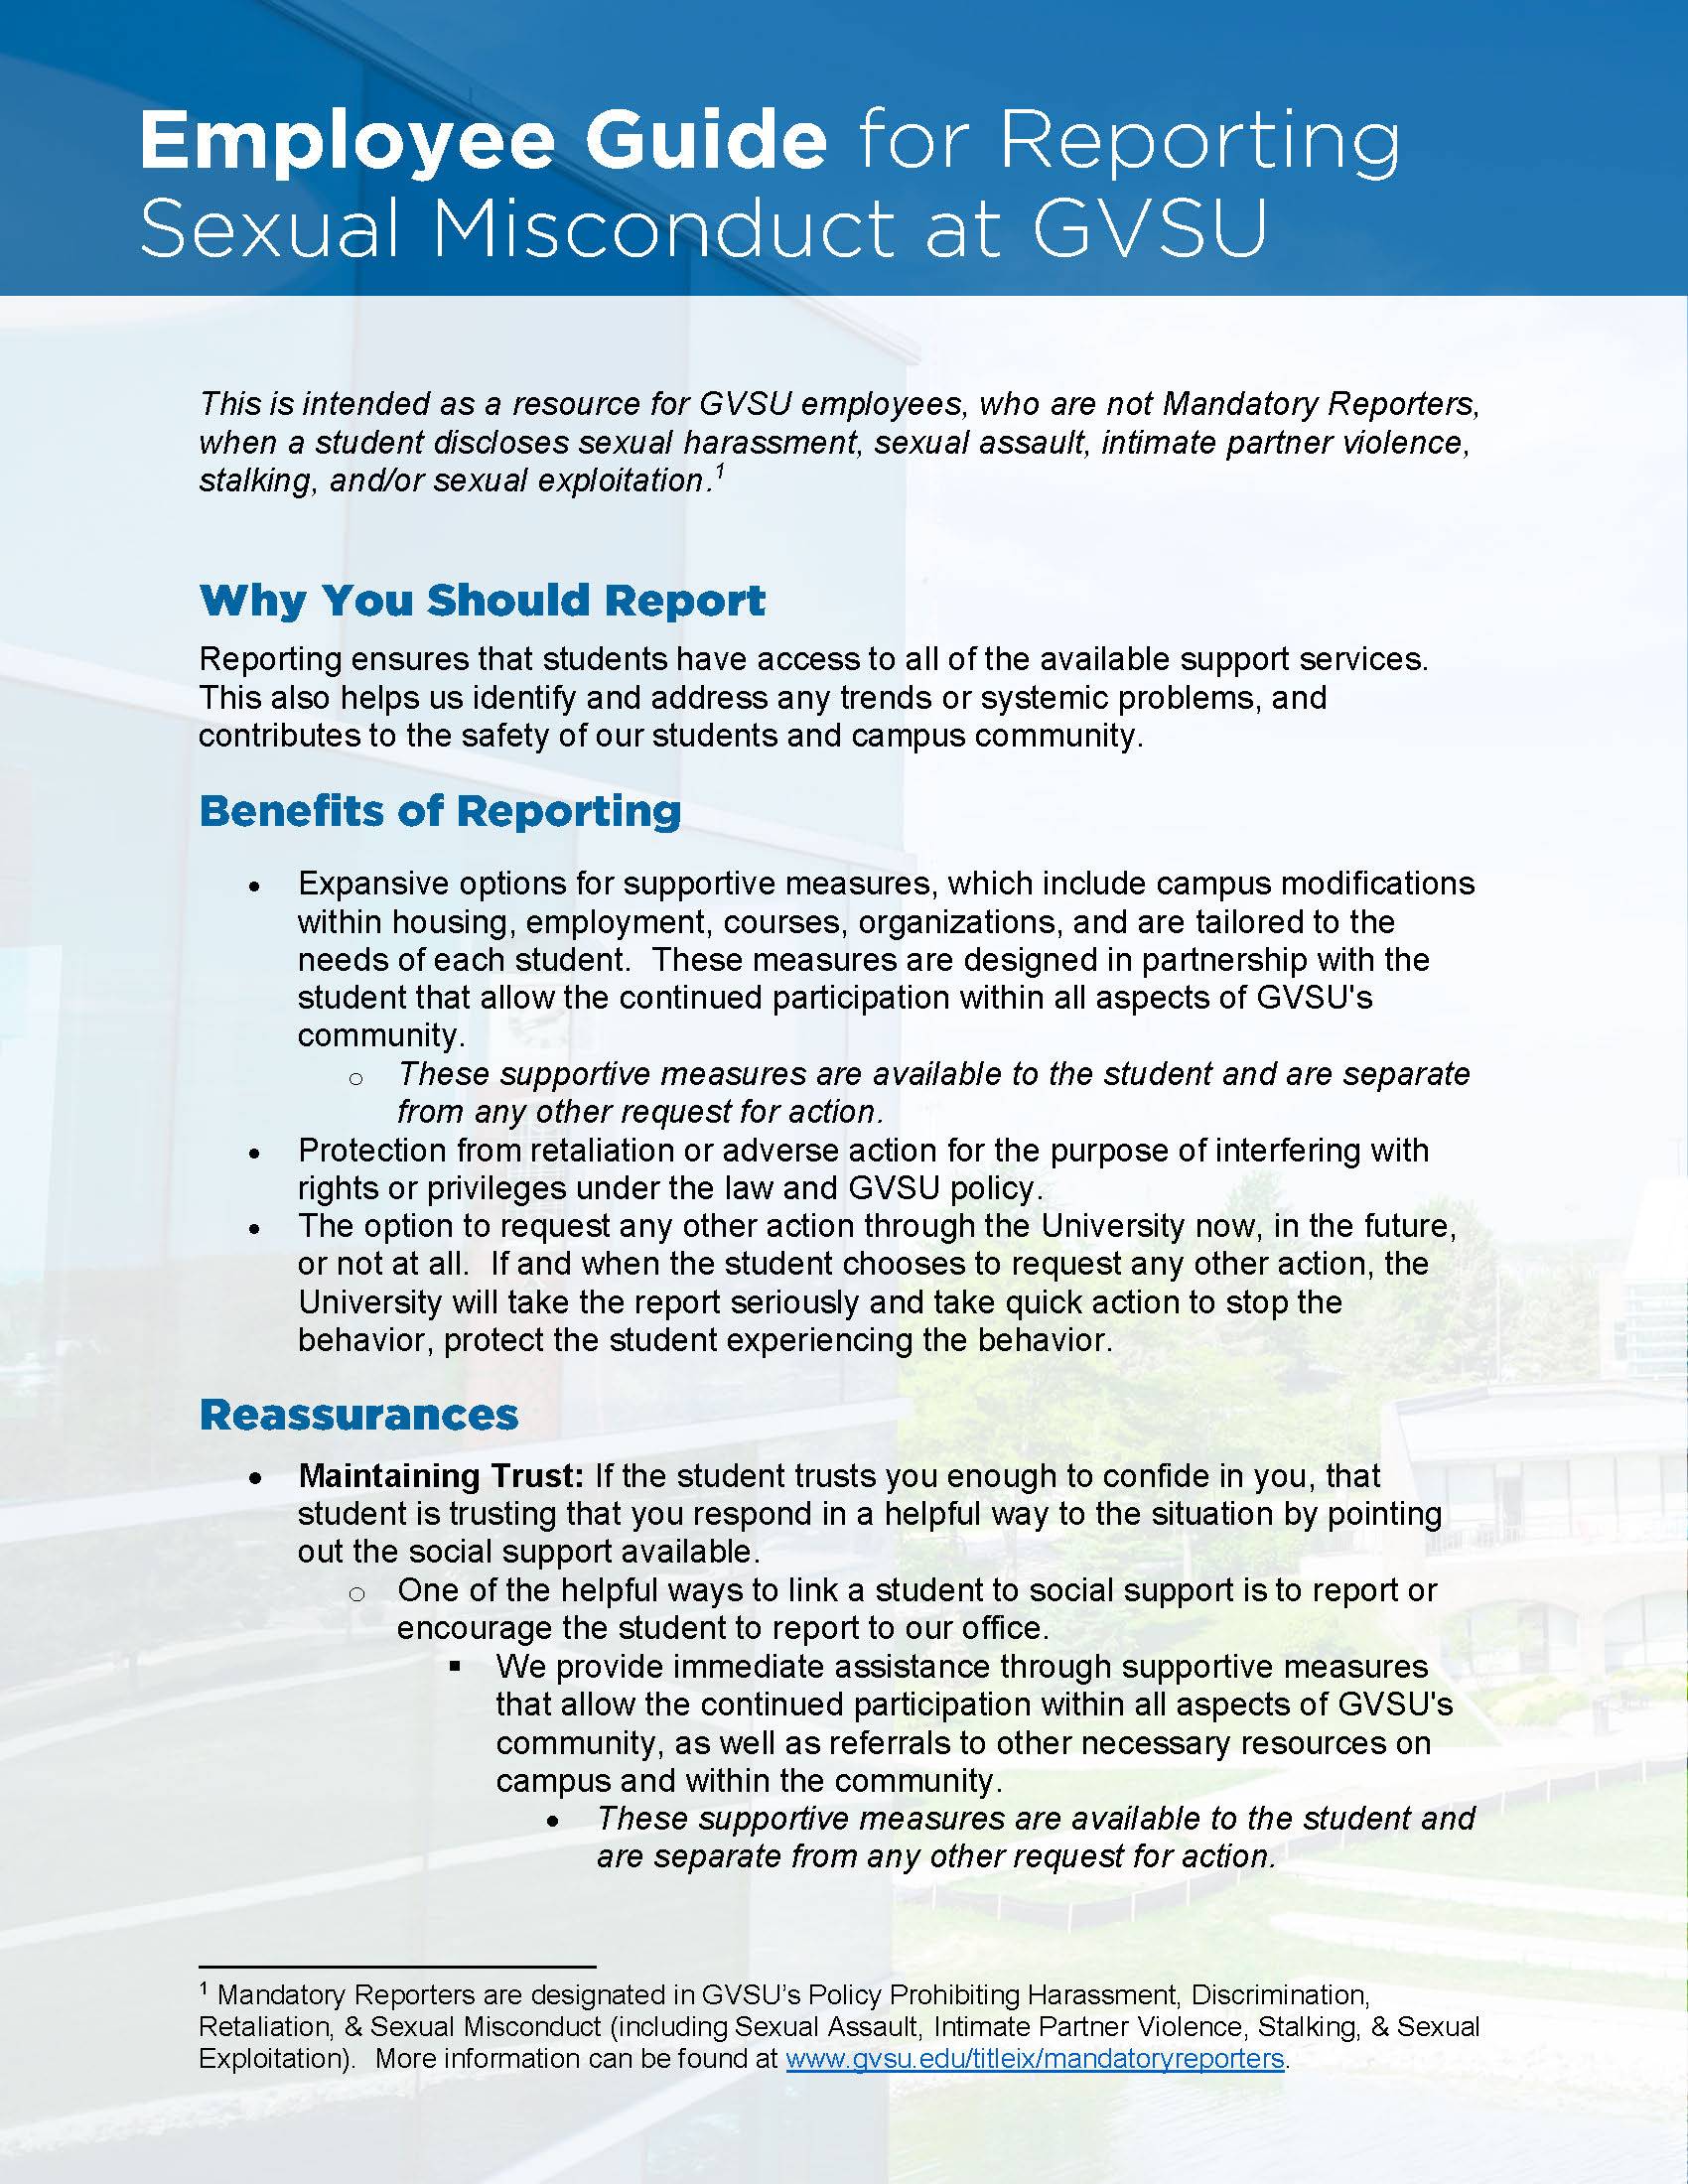 Employee Guide for Reporting Sexual Misconduct at GVSU